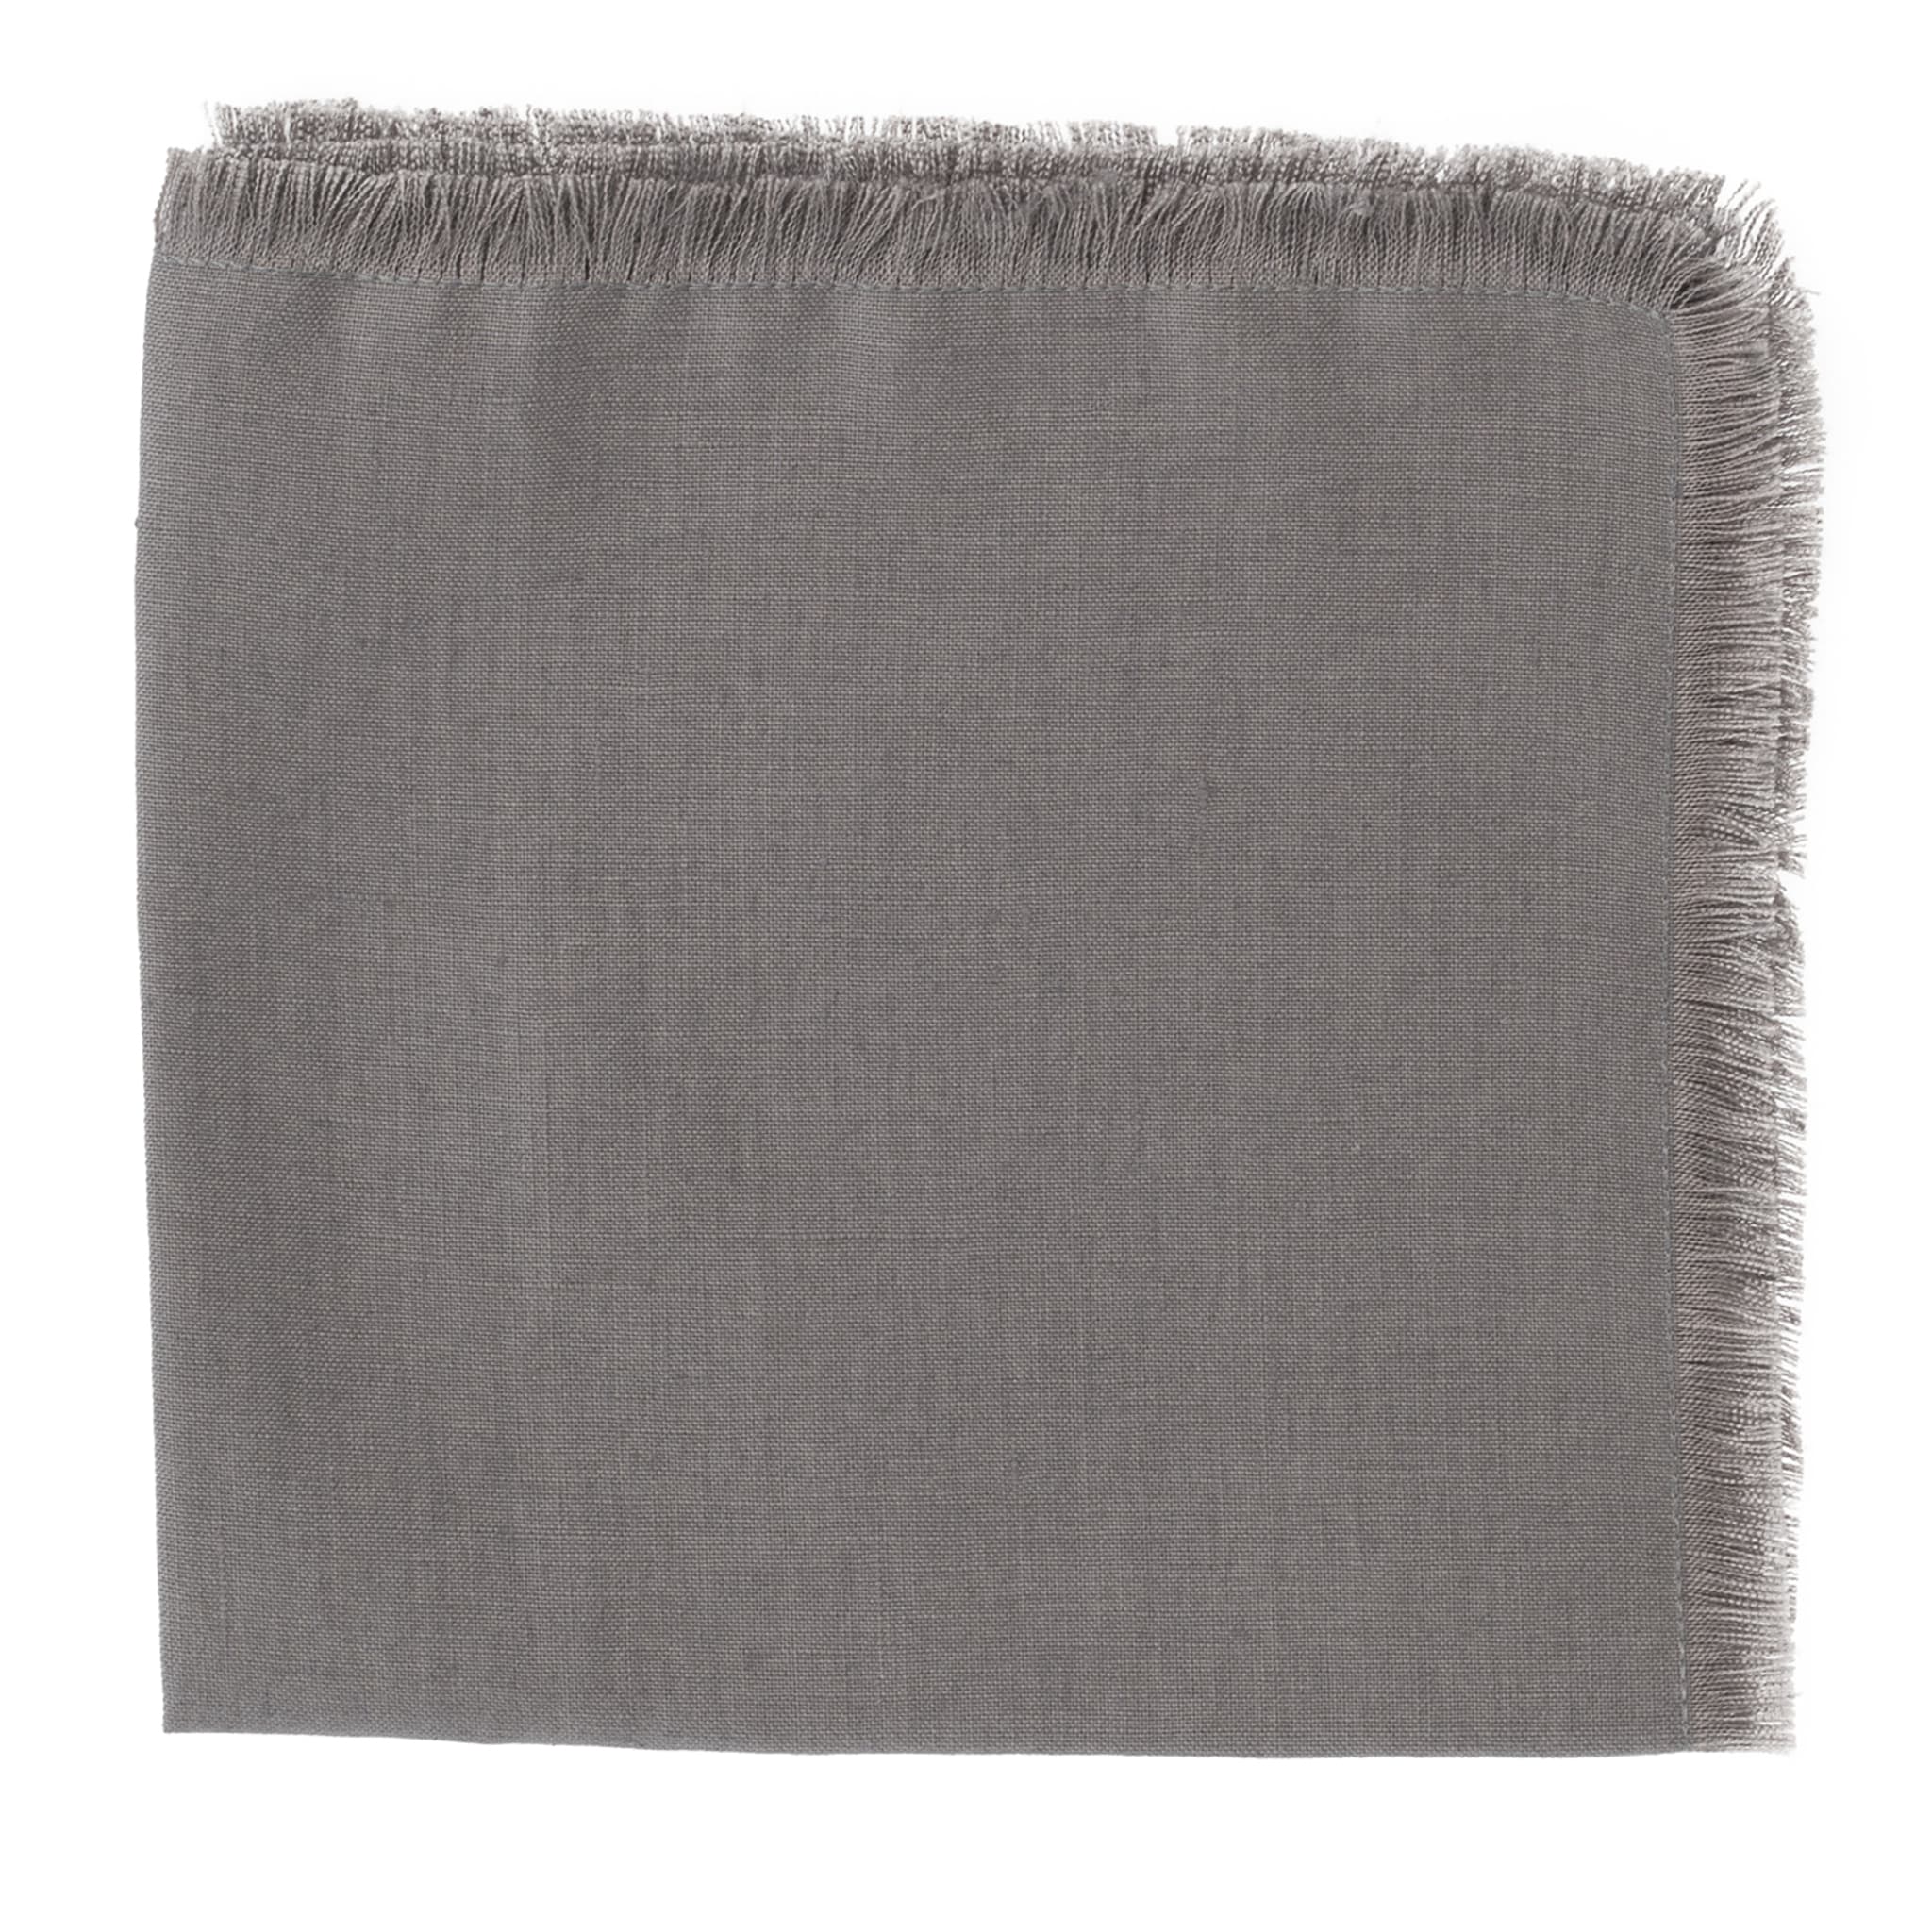 Set of 4 Luxury Hand-Fringed Grey Pure Linen Napkins - Main view